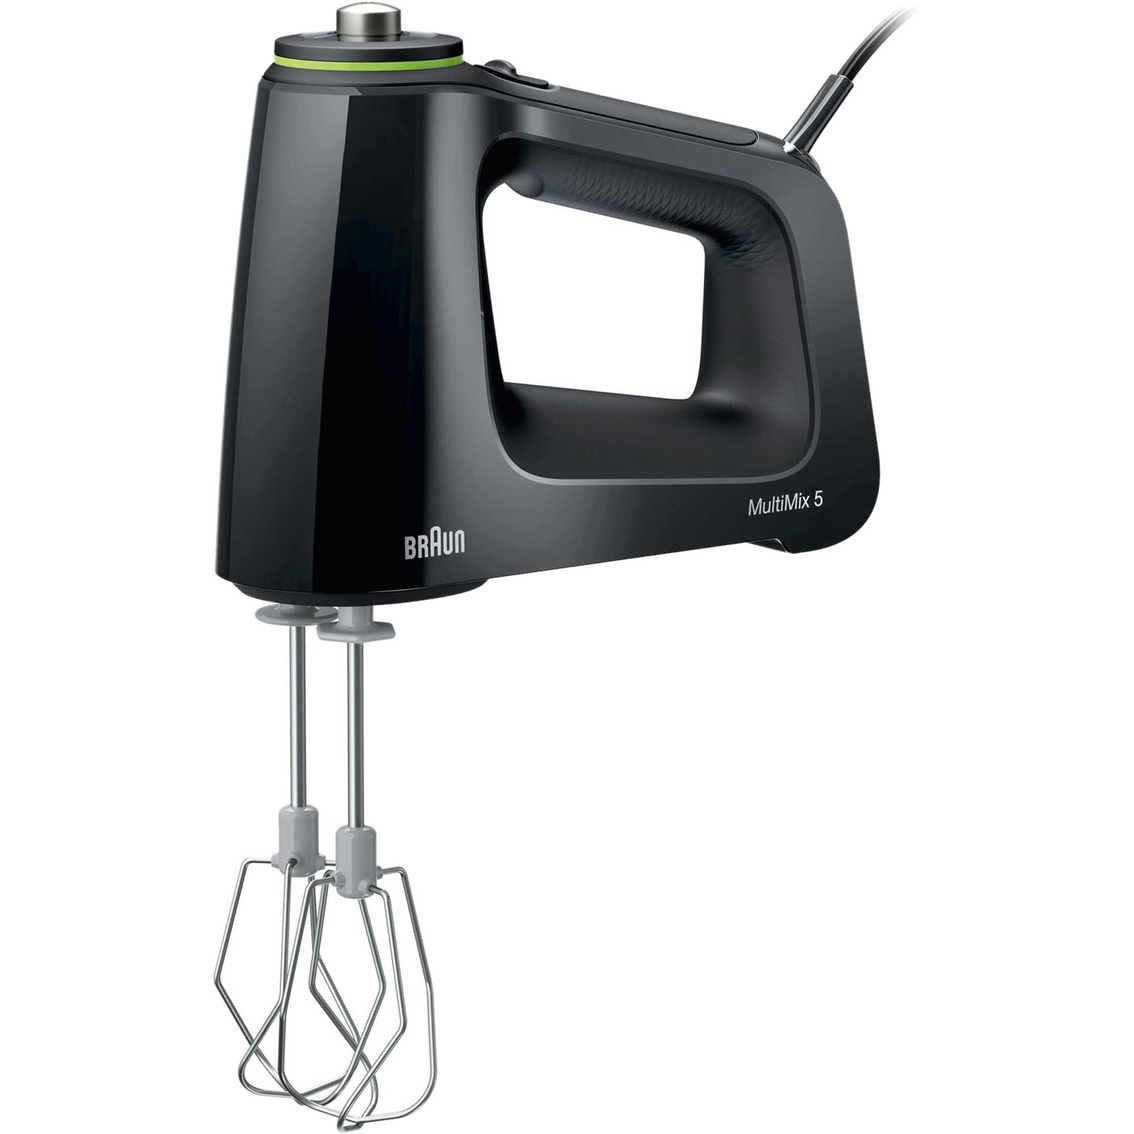 Braun MultiMix 5 Hand Mixer with Multi Whisks and Dough Hooks - Image 2 of 10